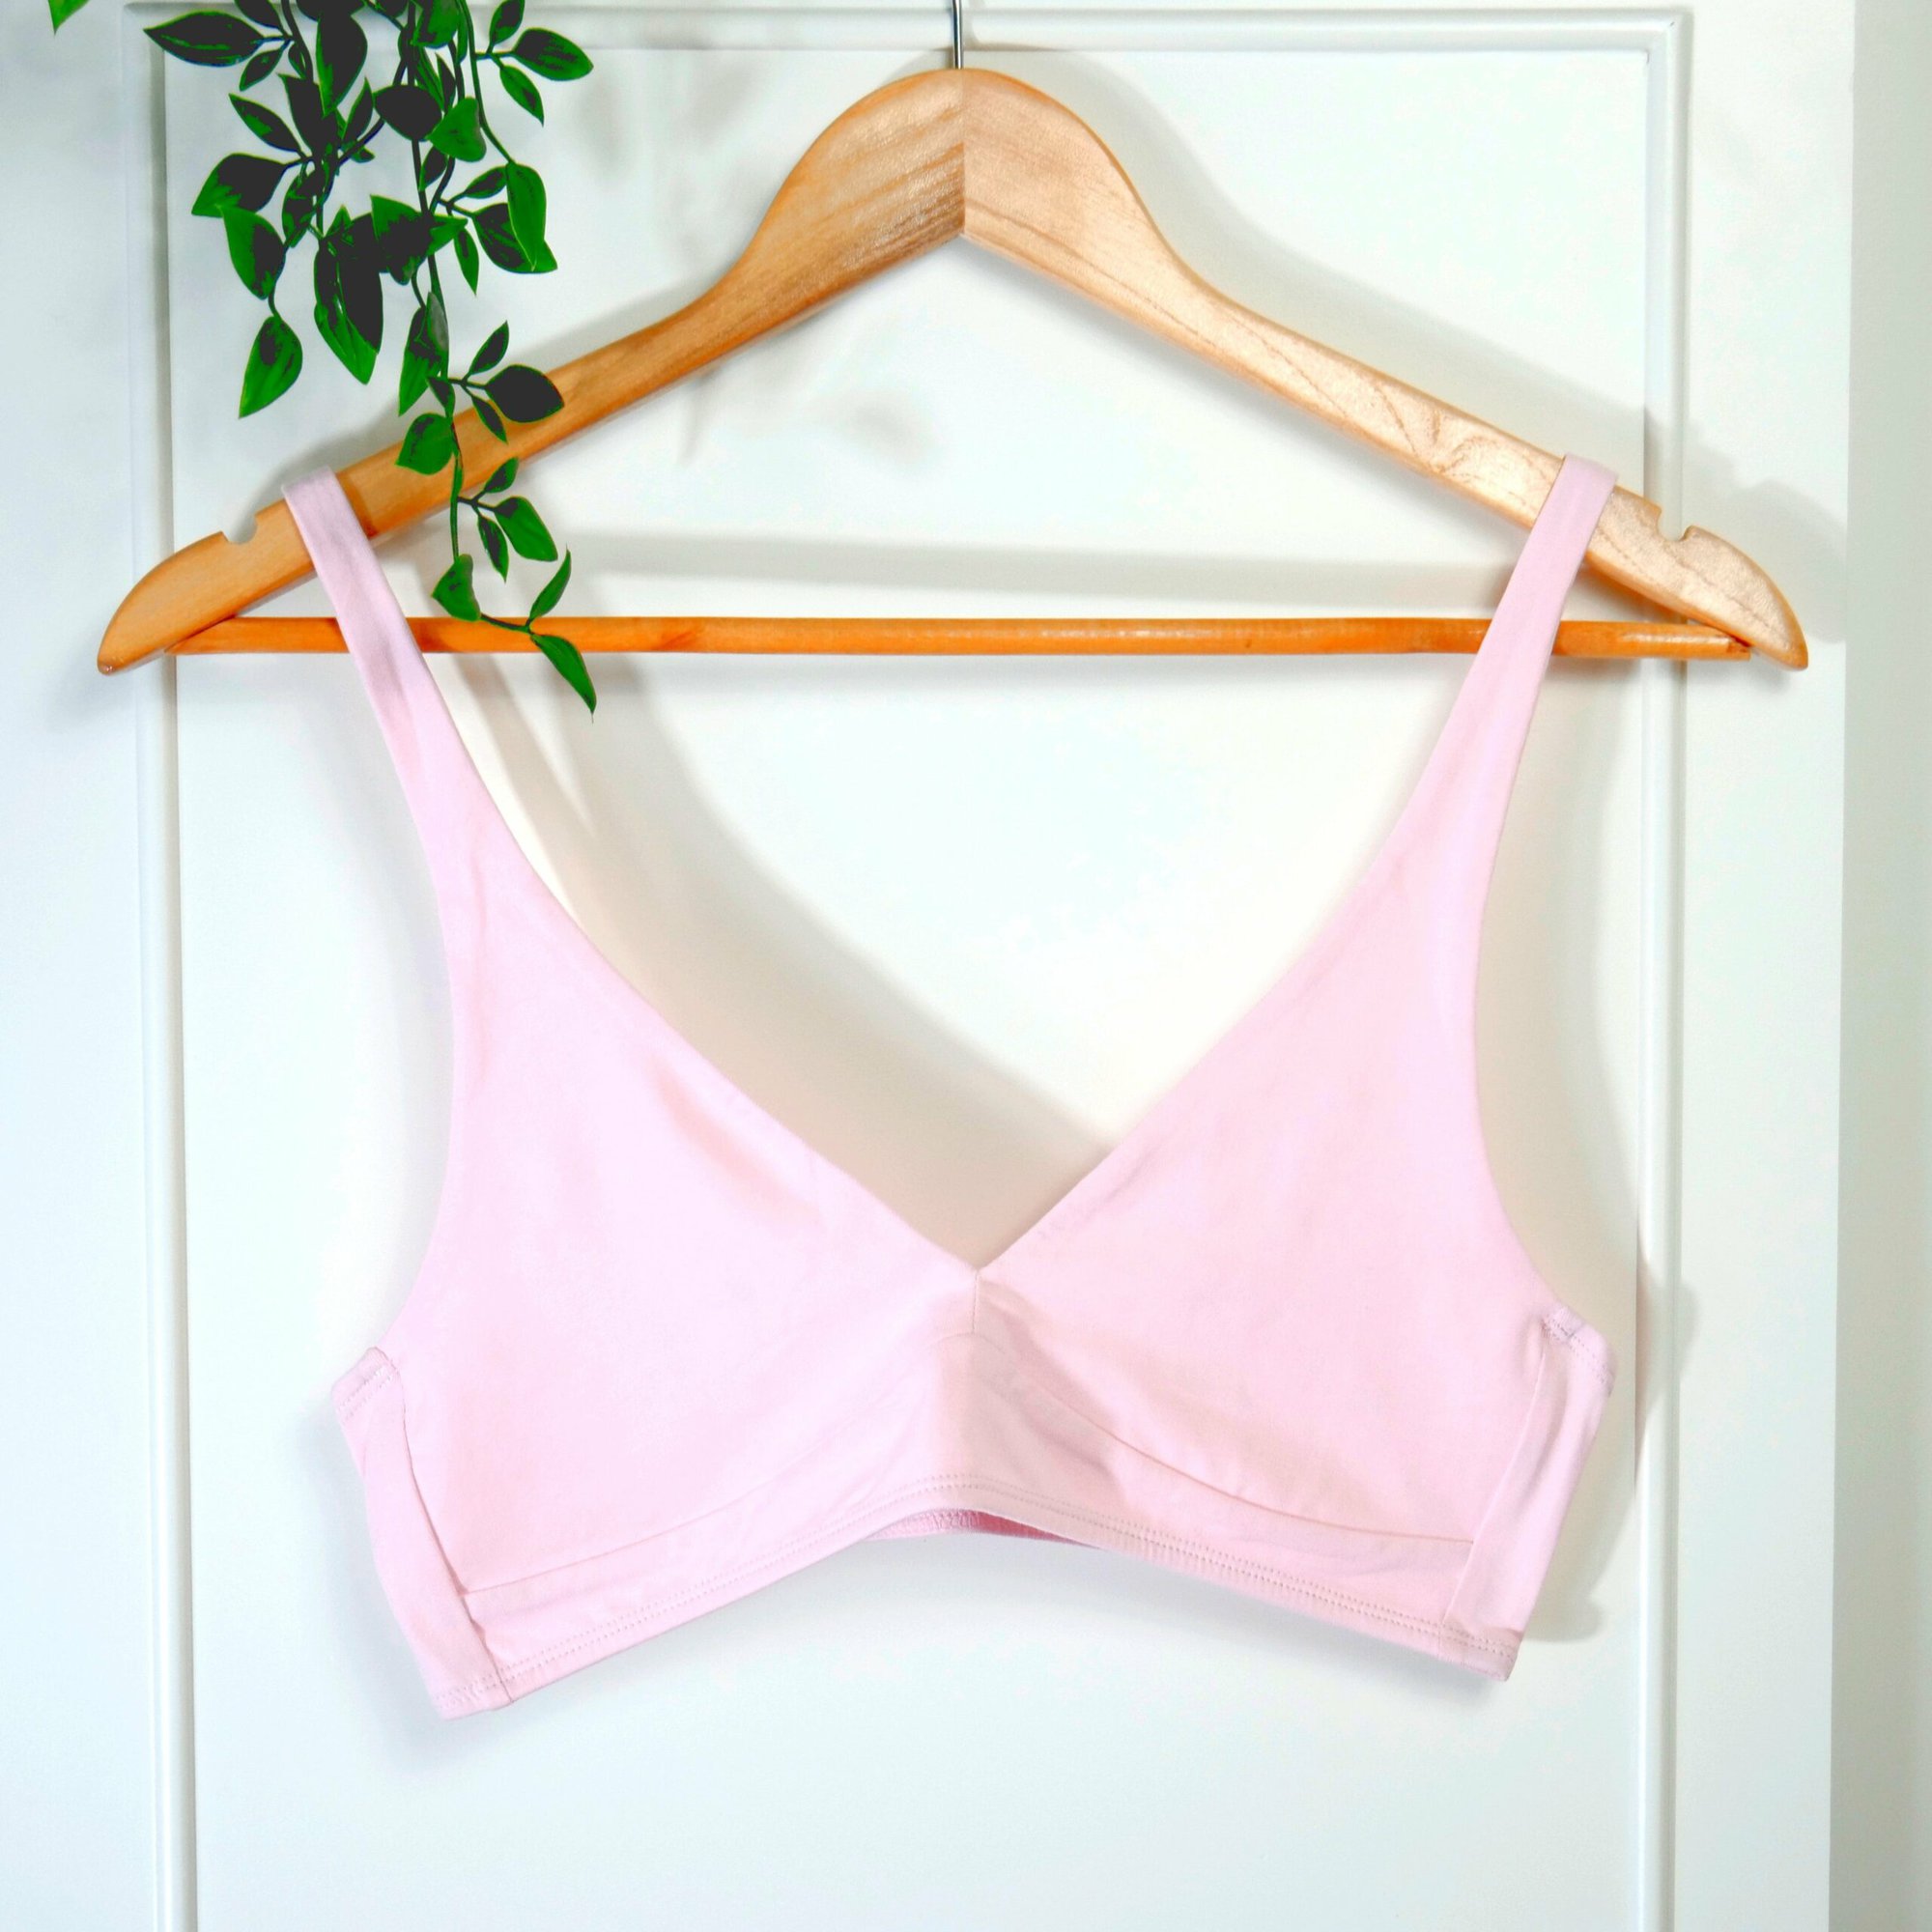 Women's organic cotton bralette in light pink - Extra small (band width 27", UK 8-10), Light Pink